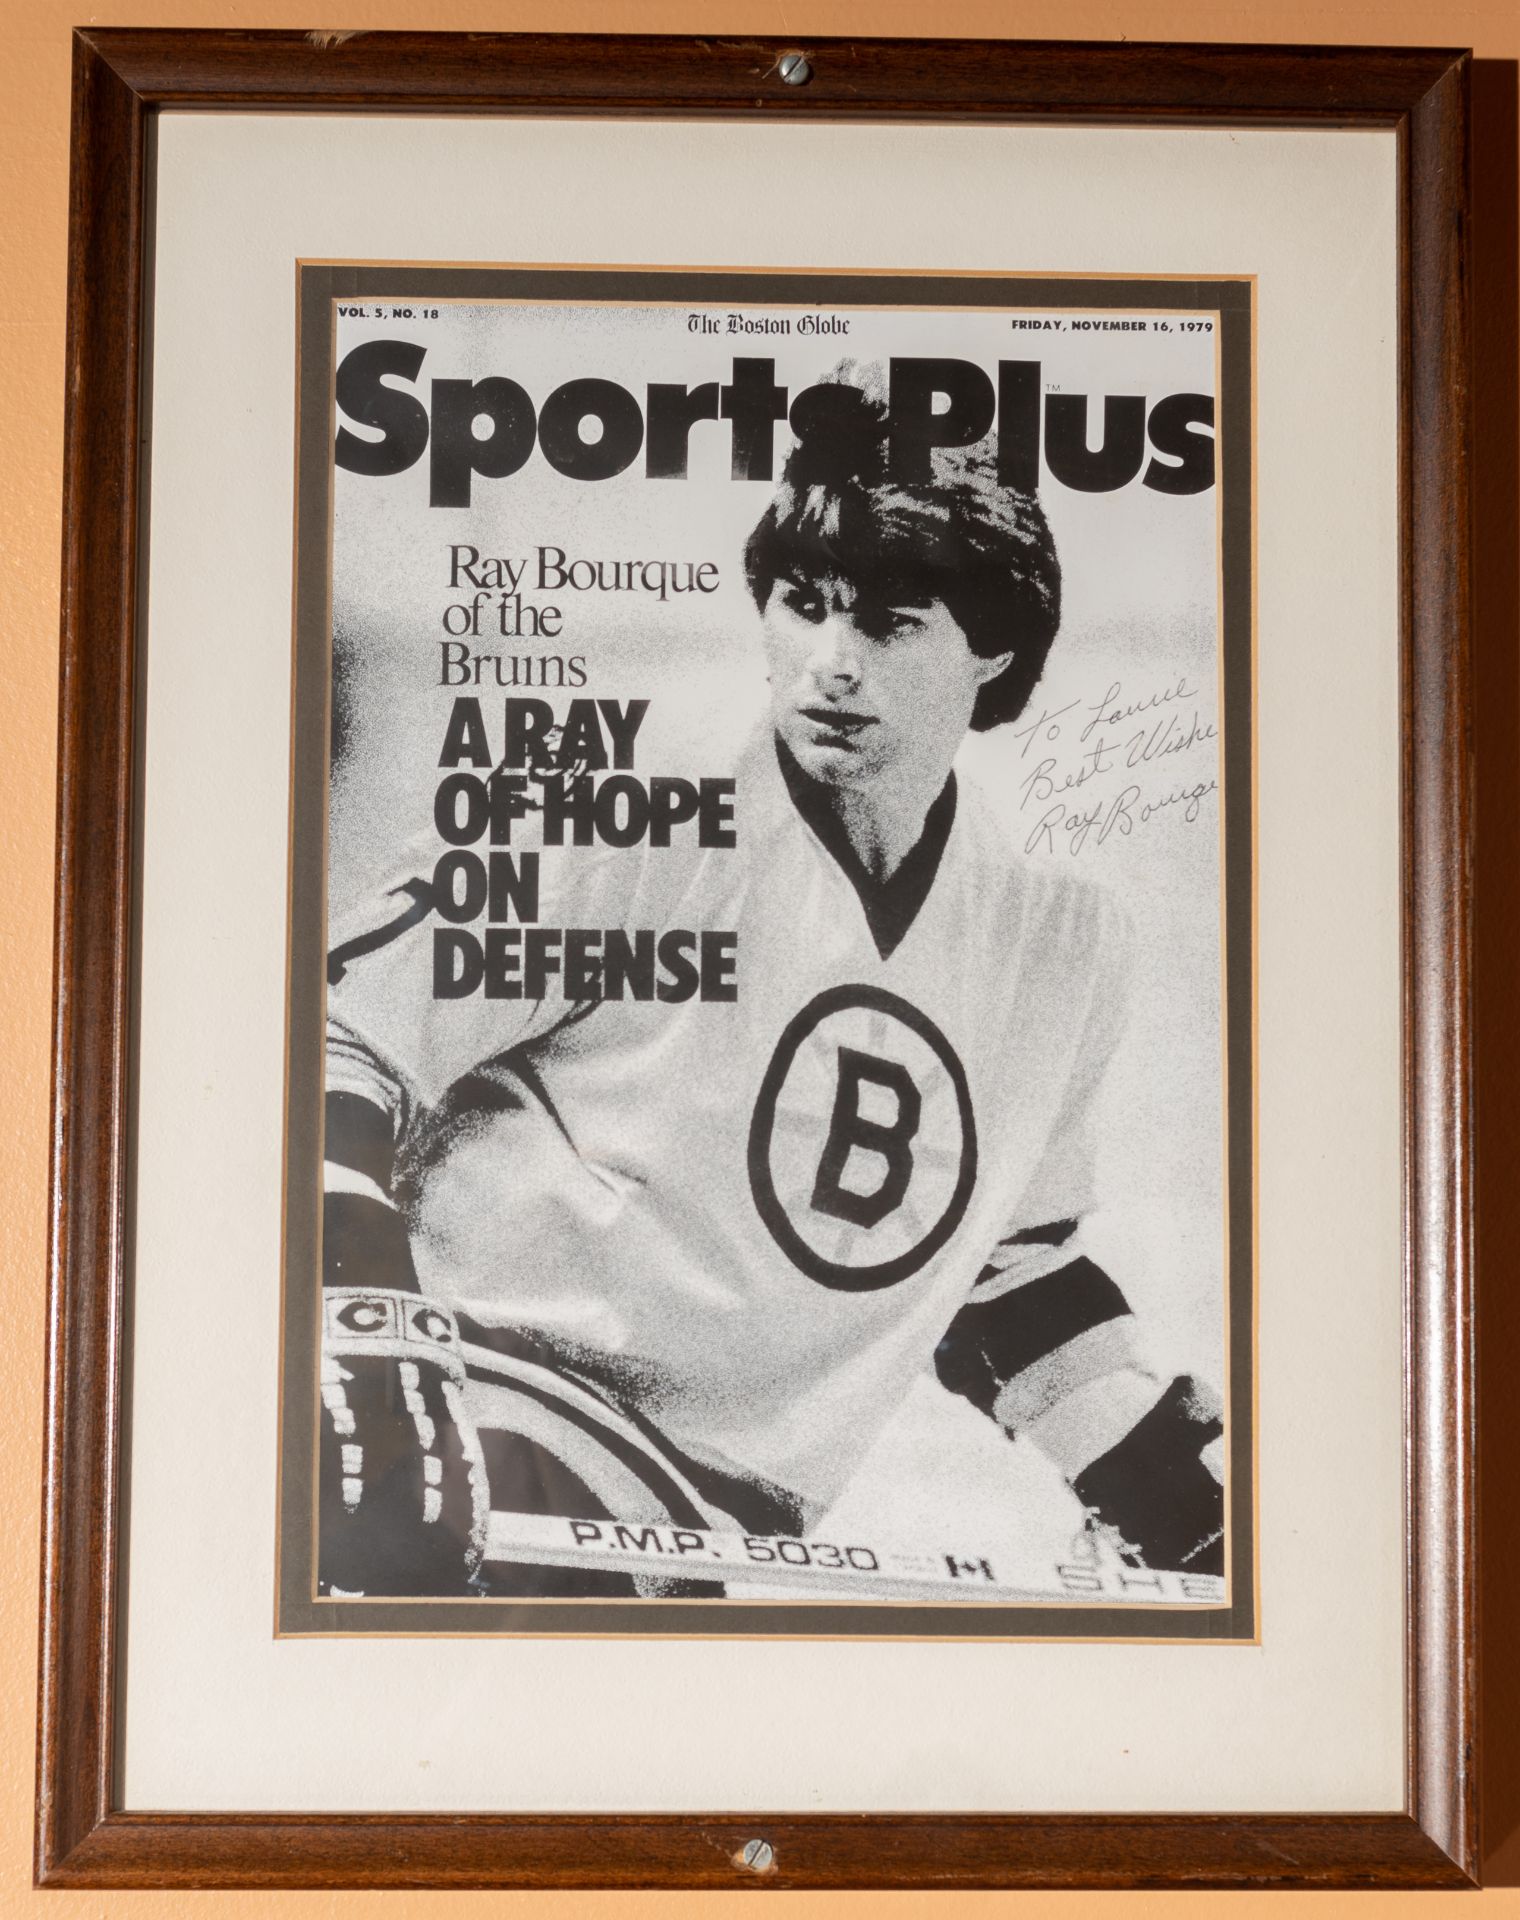 Ray Bourque 1979 Sports Plus Cover Framed Photo Reproduction Signed "To Louis Best Wished Ray